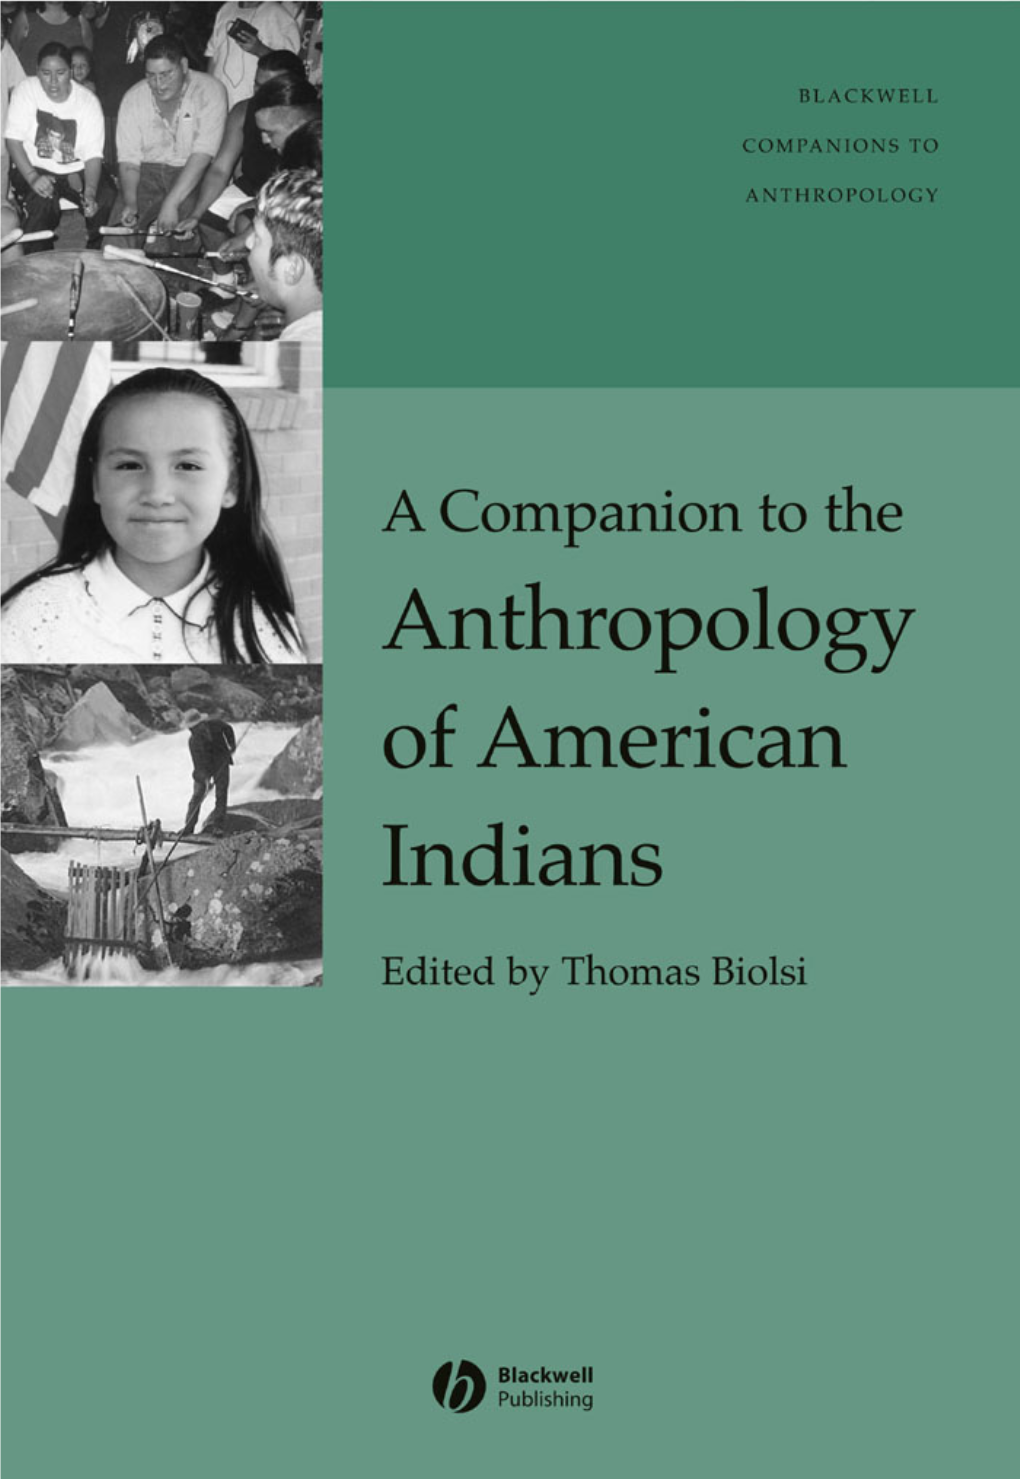 A Companion to the Anthropology of American Indians Biolsi/Companion to the Anthropology of American Indians Final Proof 17.9.2004 5:50Pm Page Ii